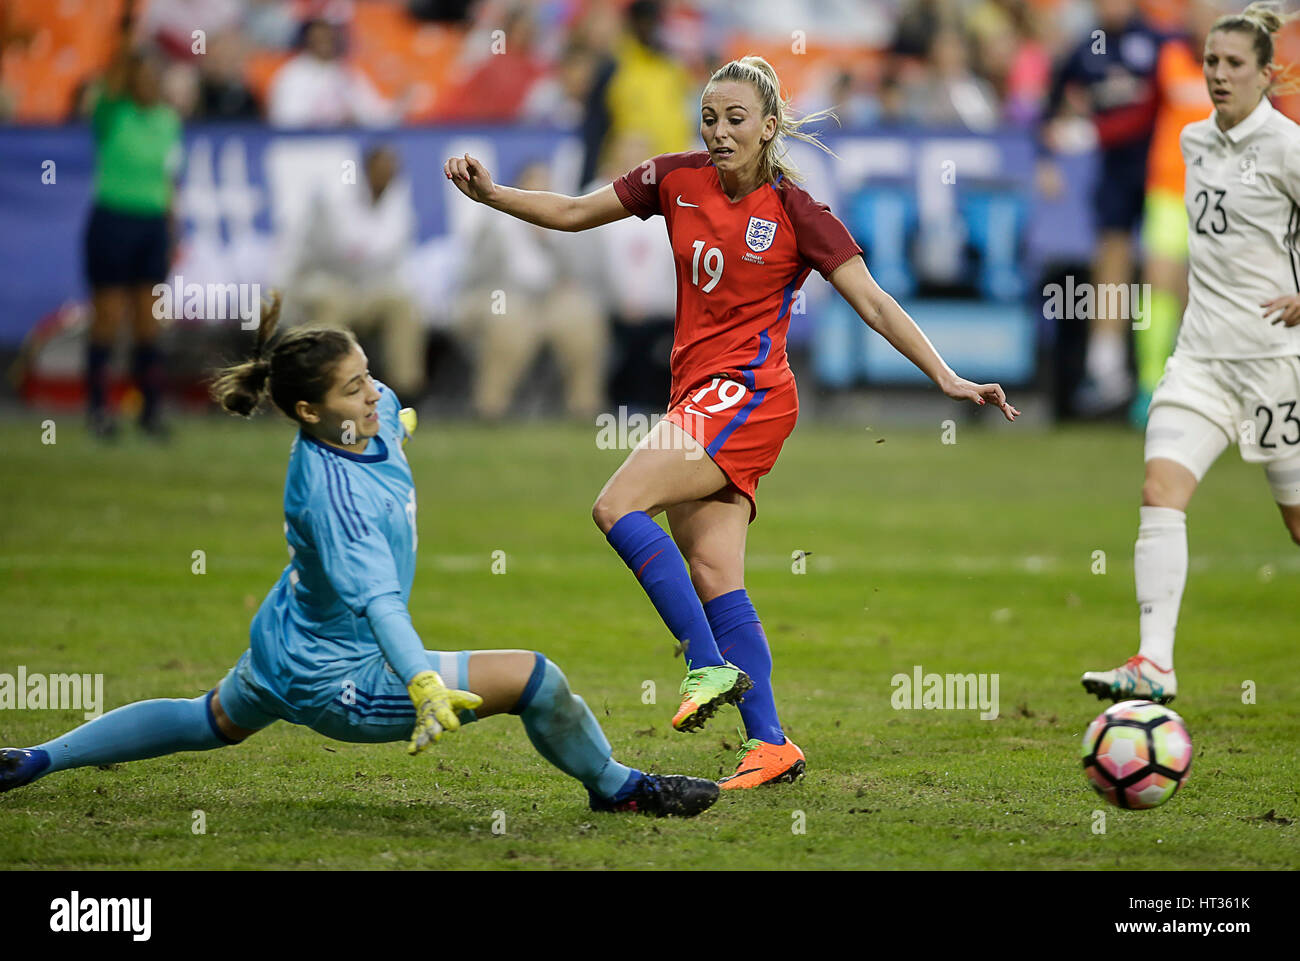 Washington DC, USA. 7th Mar, 2017. German Women's National Team Goalkeeper #21 Lisa WeiB comes out to stop the ball before English Women's National Team Forward #19 Toni Duggan is called offsides during a soccer match as part of the SheBelieve Cup 2017 between Germany and England at RFK Stadium in Washington DC. Germany defeats England, 1-0. Justin Cooper/CSM/Alamy Live News Stock Photo